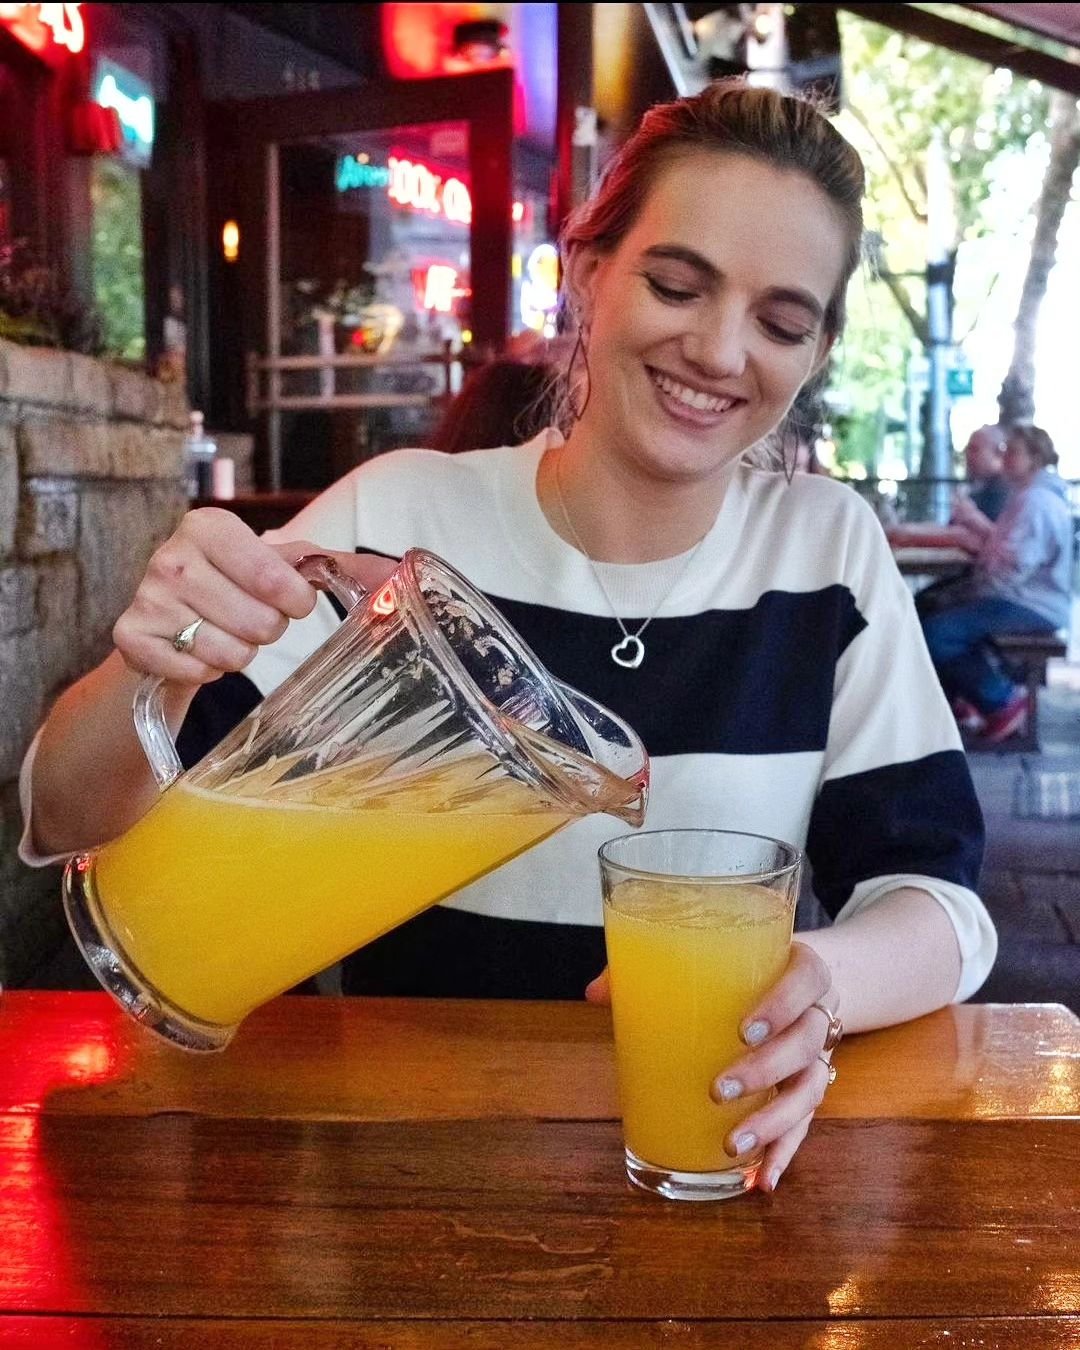 It's time to savor the simple pleasures in life: fresh air, spring blooms and pitchers of mimosas available 6am-2am daily. 

📷 beckscarlyle #the5pointcafe #mimosapitcher #spring #outdoorpatio #diner #divebar #seattle